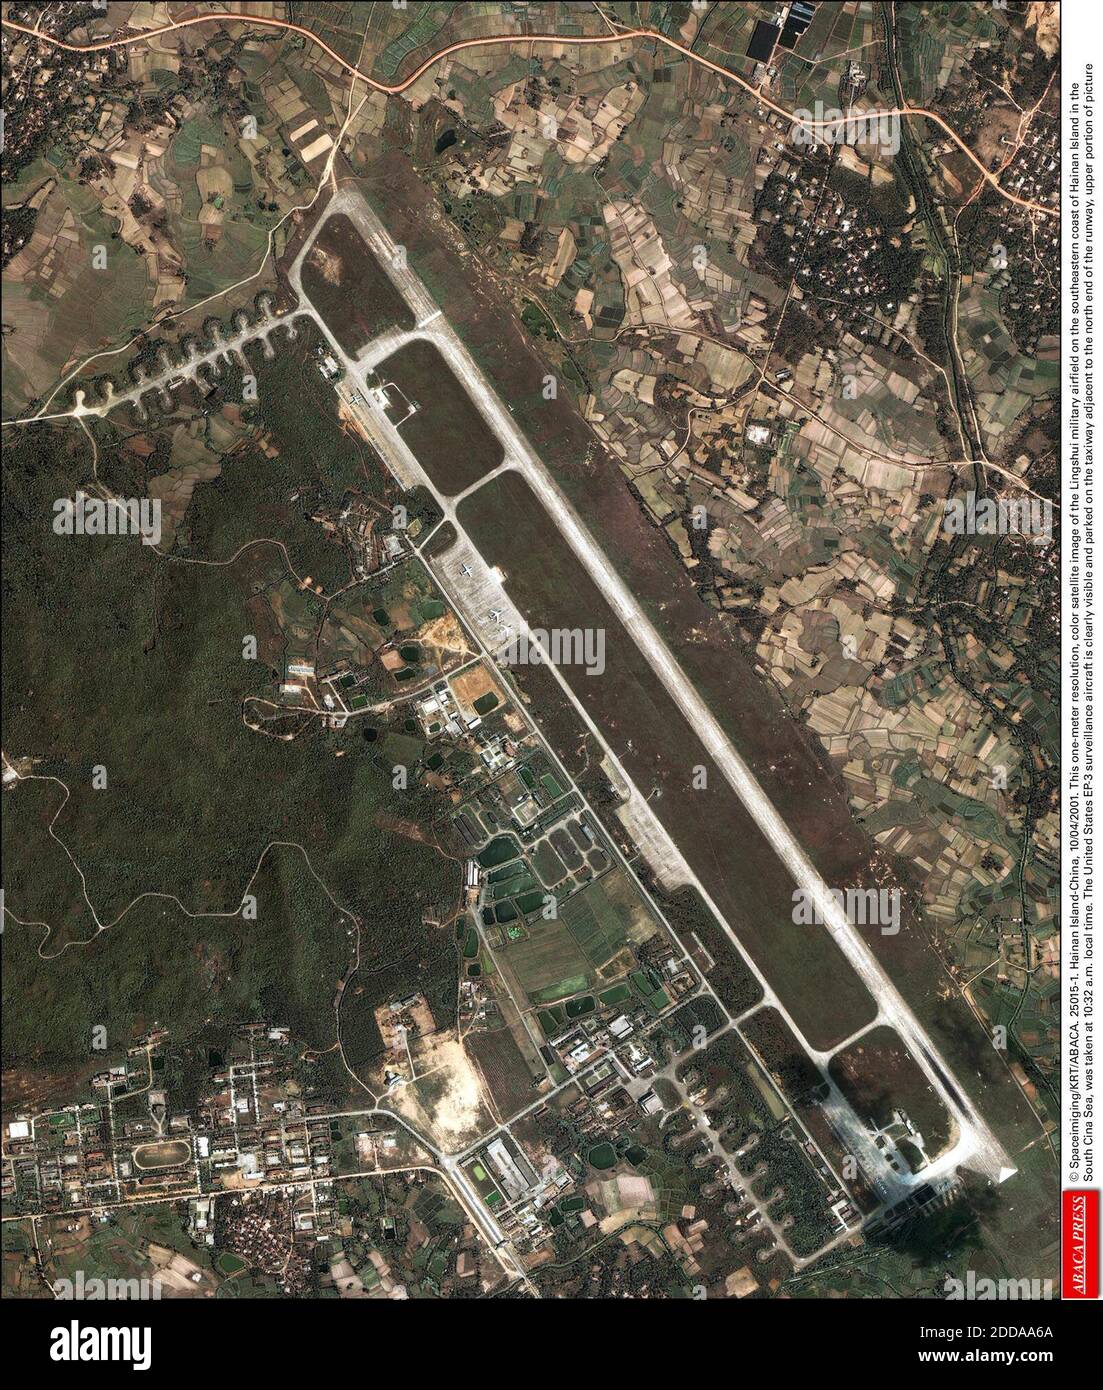 NO FILM, NO VIDEO, NO TV, NO DOCUMENTARY - © Spaceimiging/KRT/ABACA. 25015-1. Hainan Island-China, 10/04/2001. This one-meter resolution, color satellite image of the Lingshui military airfield on the southeastern coast of Hainan Island in the South Cina Sea, was taken at 10:32 a.m. local time. Th Stock Photo